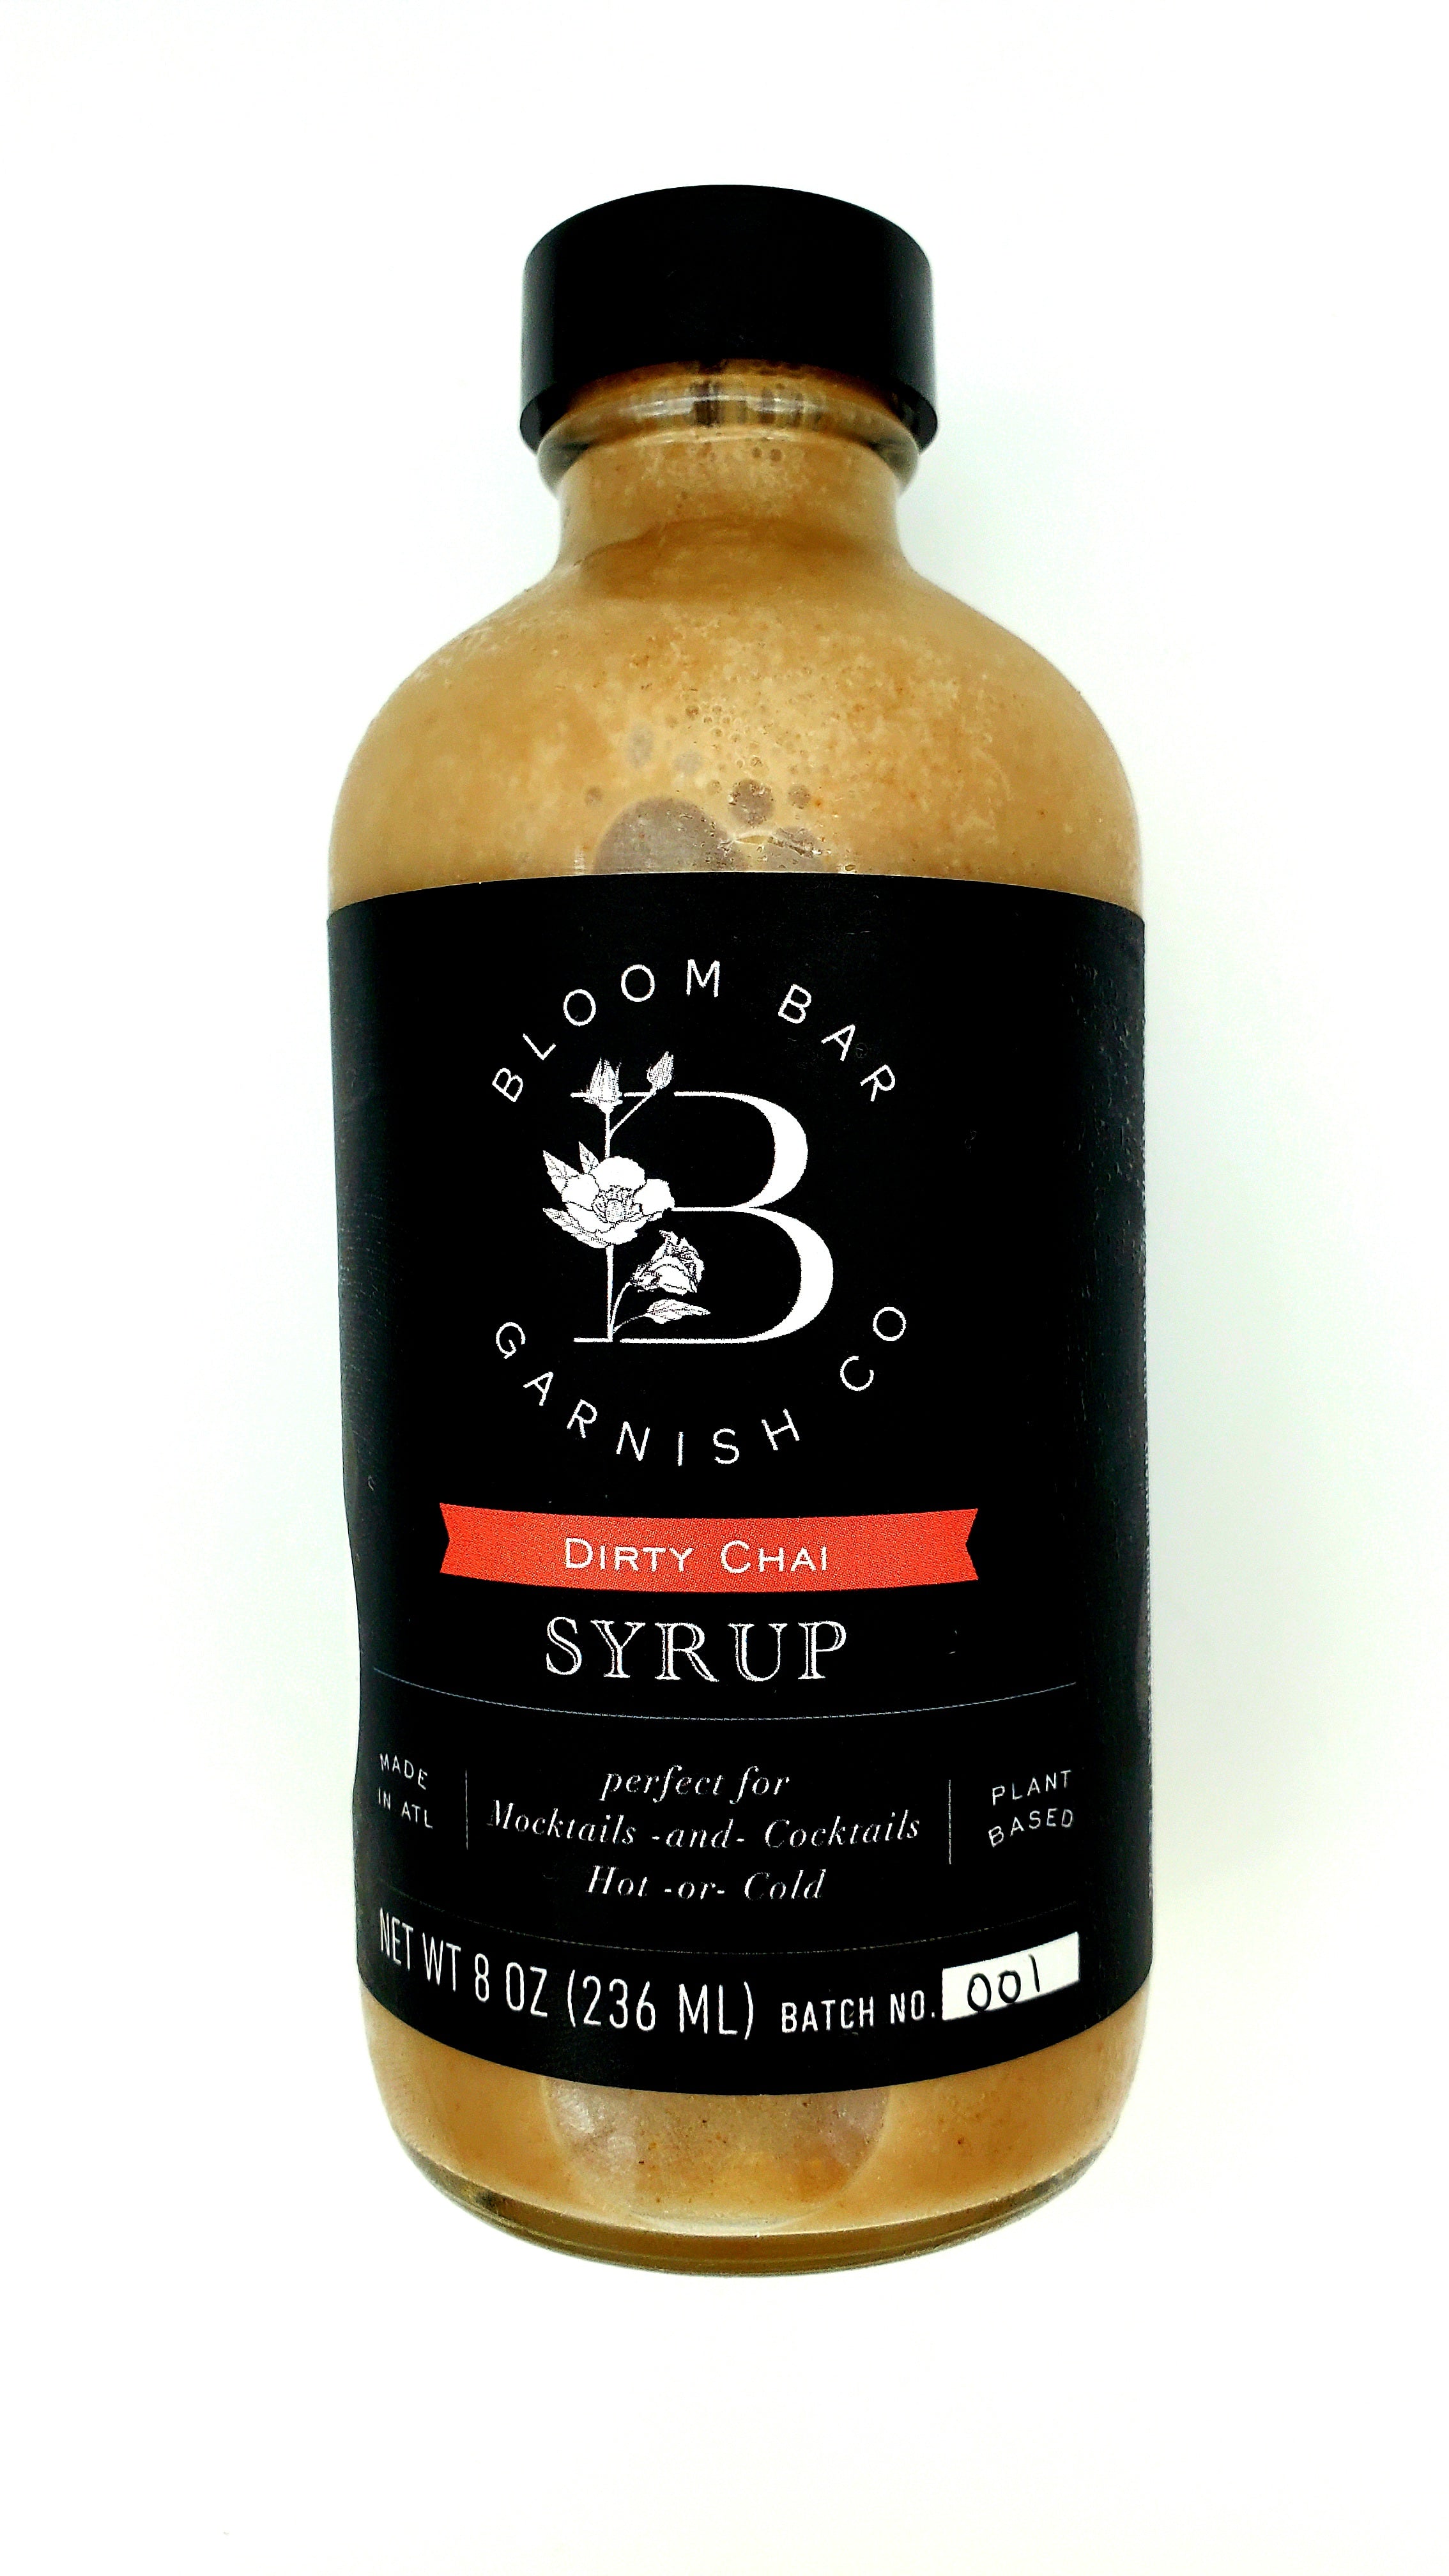 Dirty Chai Syrup